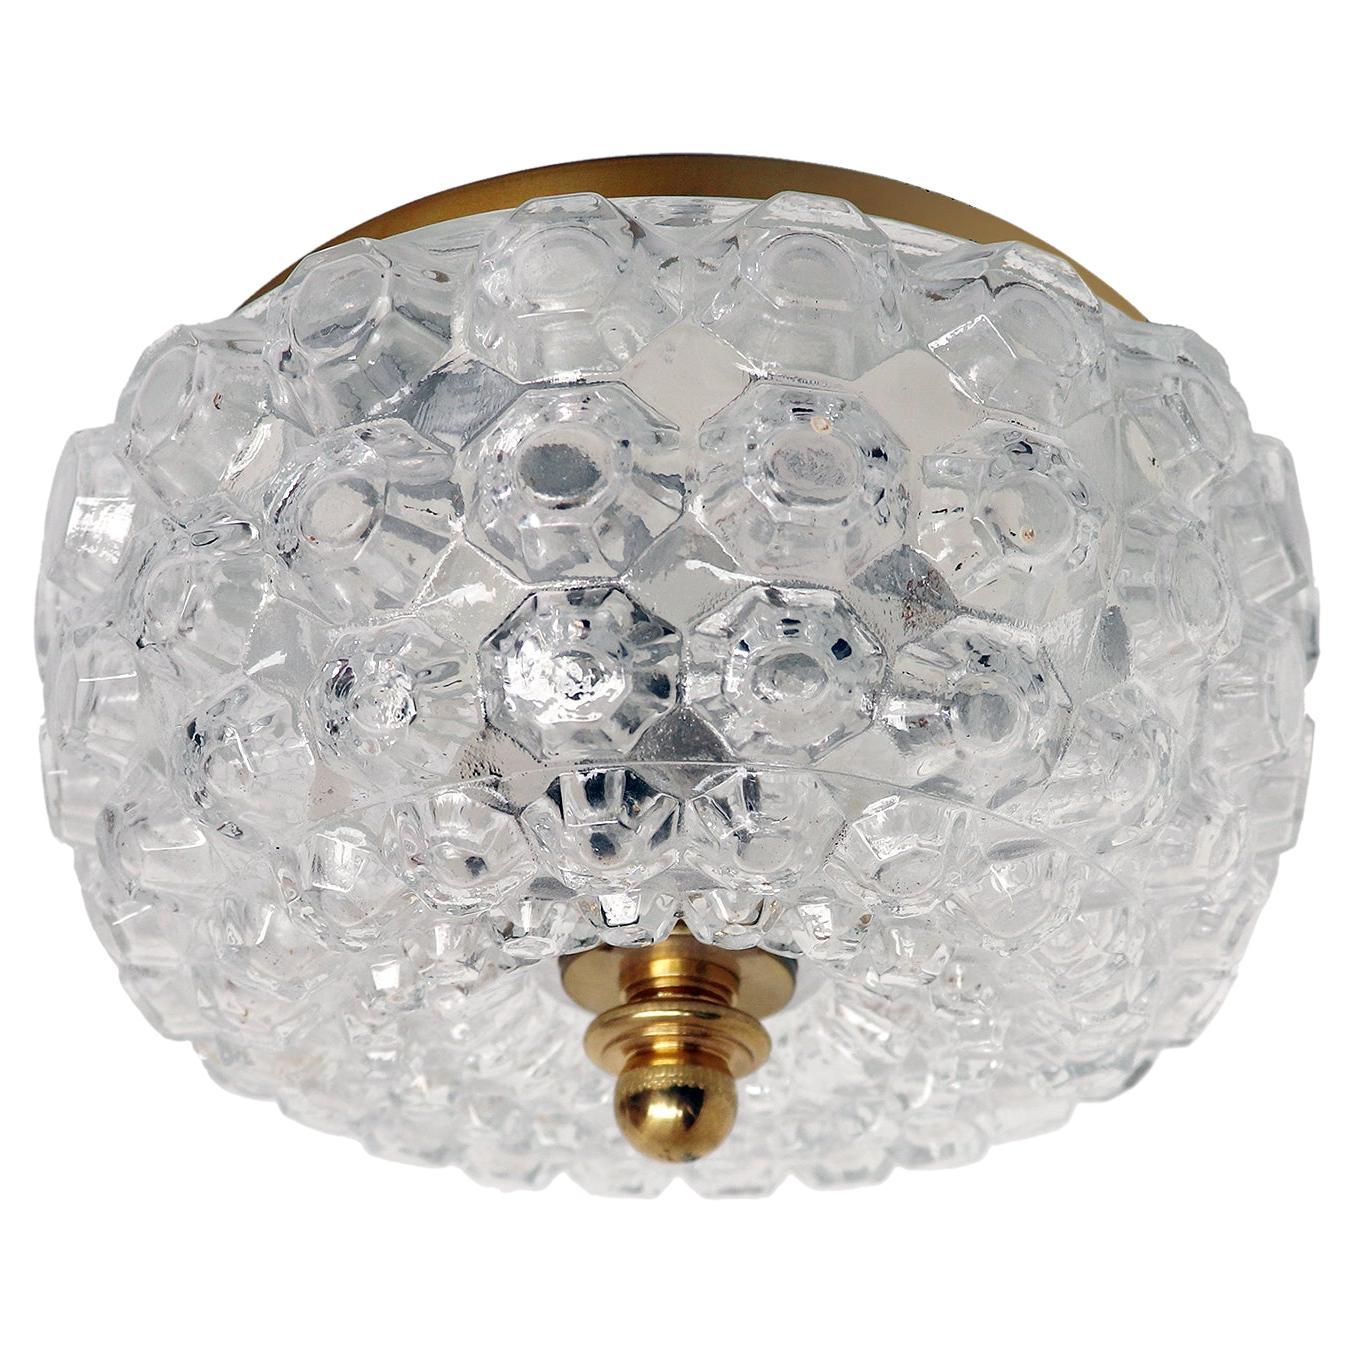 Elegant modernist flush mount ceiling light and wall sconce made of clear, thick and textured glass dome on a brass frame designed by Helena Tynell attr. Manufactured by Glashutte Limburg, Germany in the 1960s. 

Design: Helena Tynell attr. 
Style: